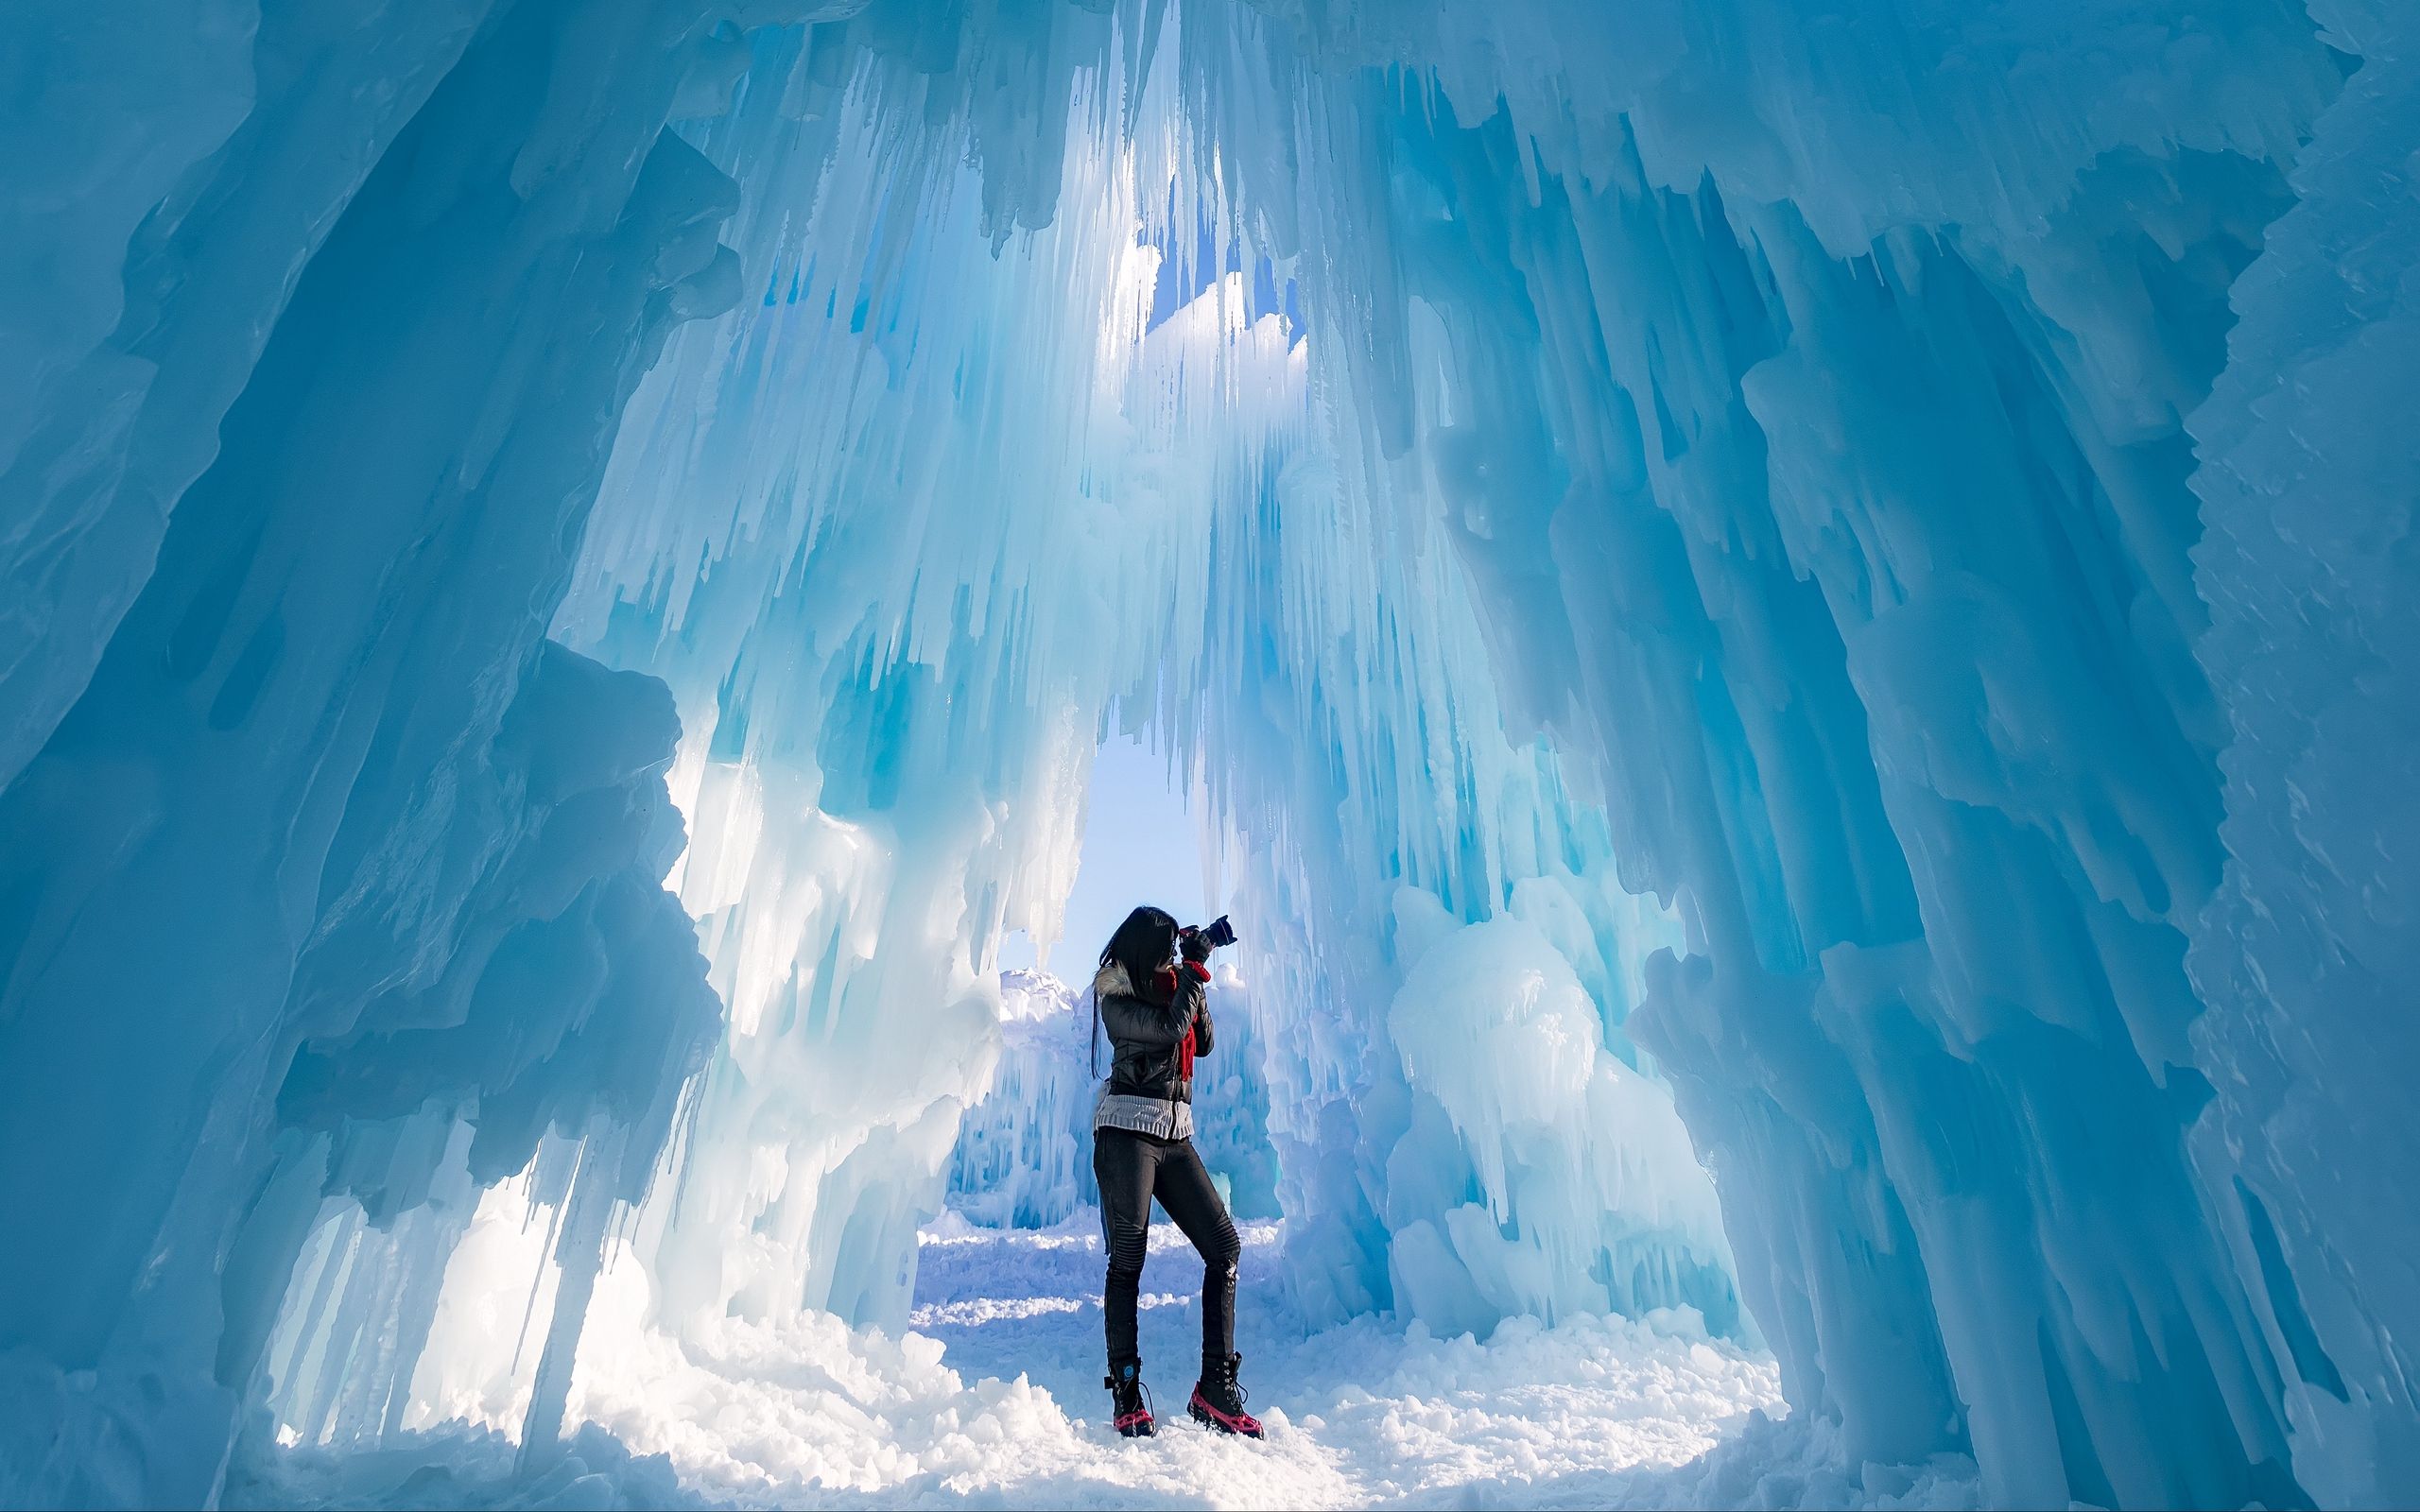 Download wallpaper 2560x1600 ice castle, photographer, ice